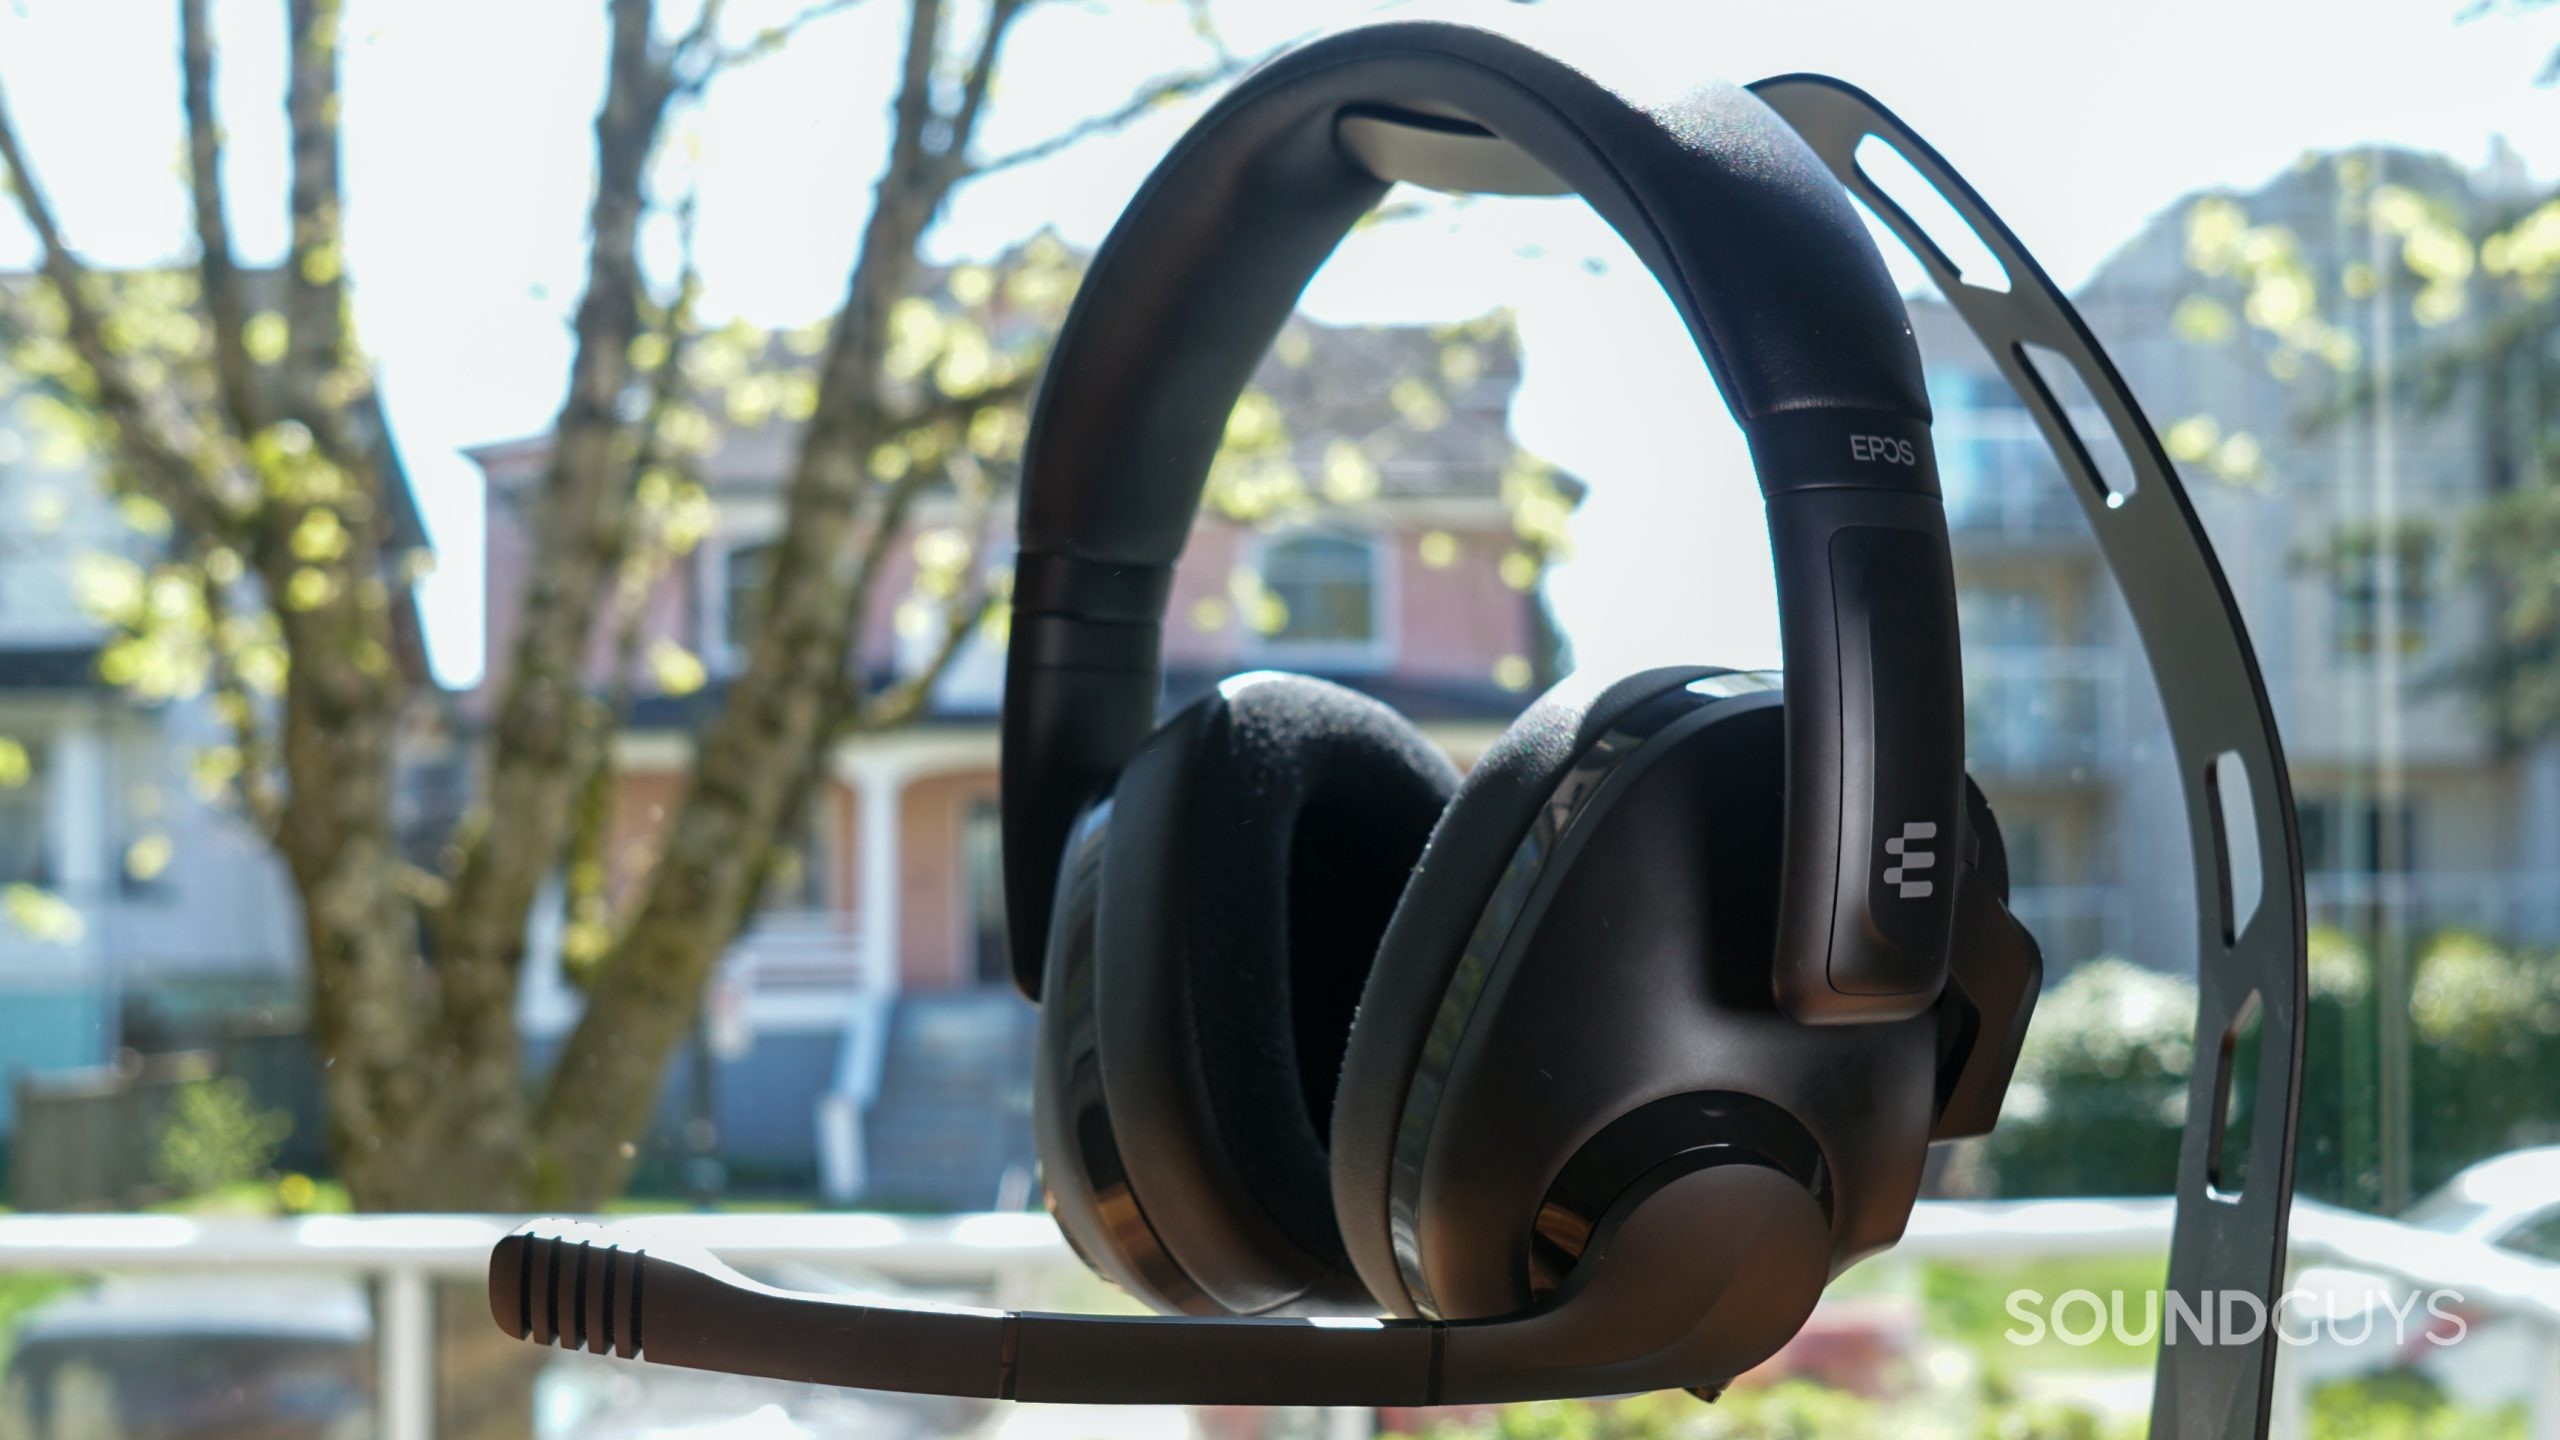 The EPOS H3 gaming headset sits on a stand in front of a window.